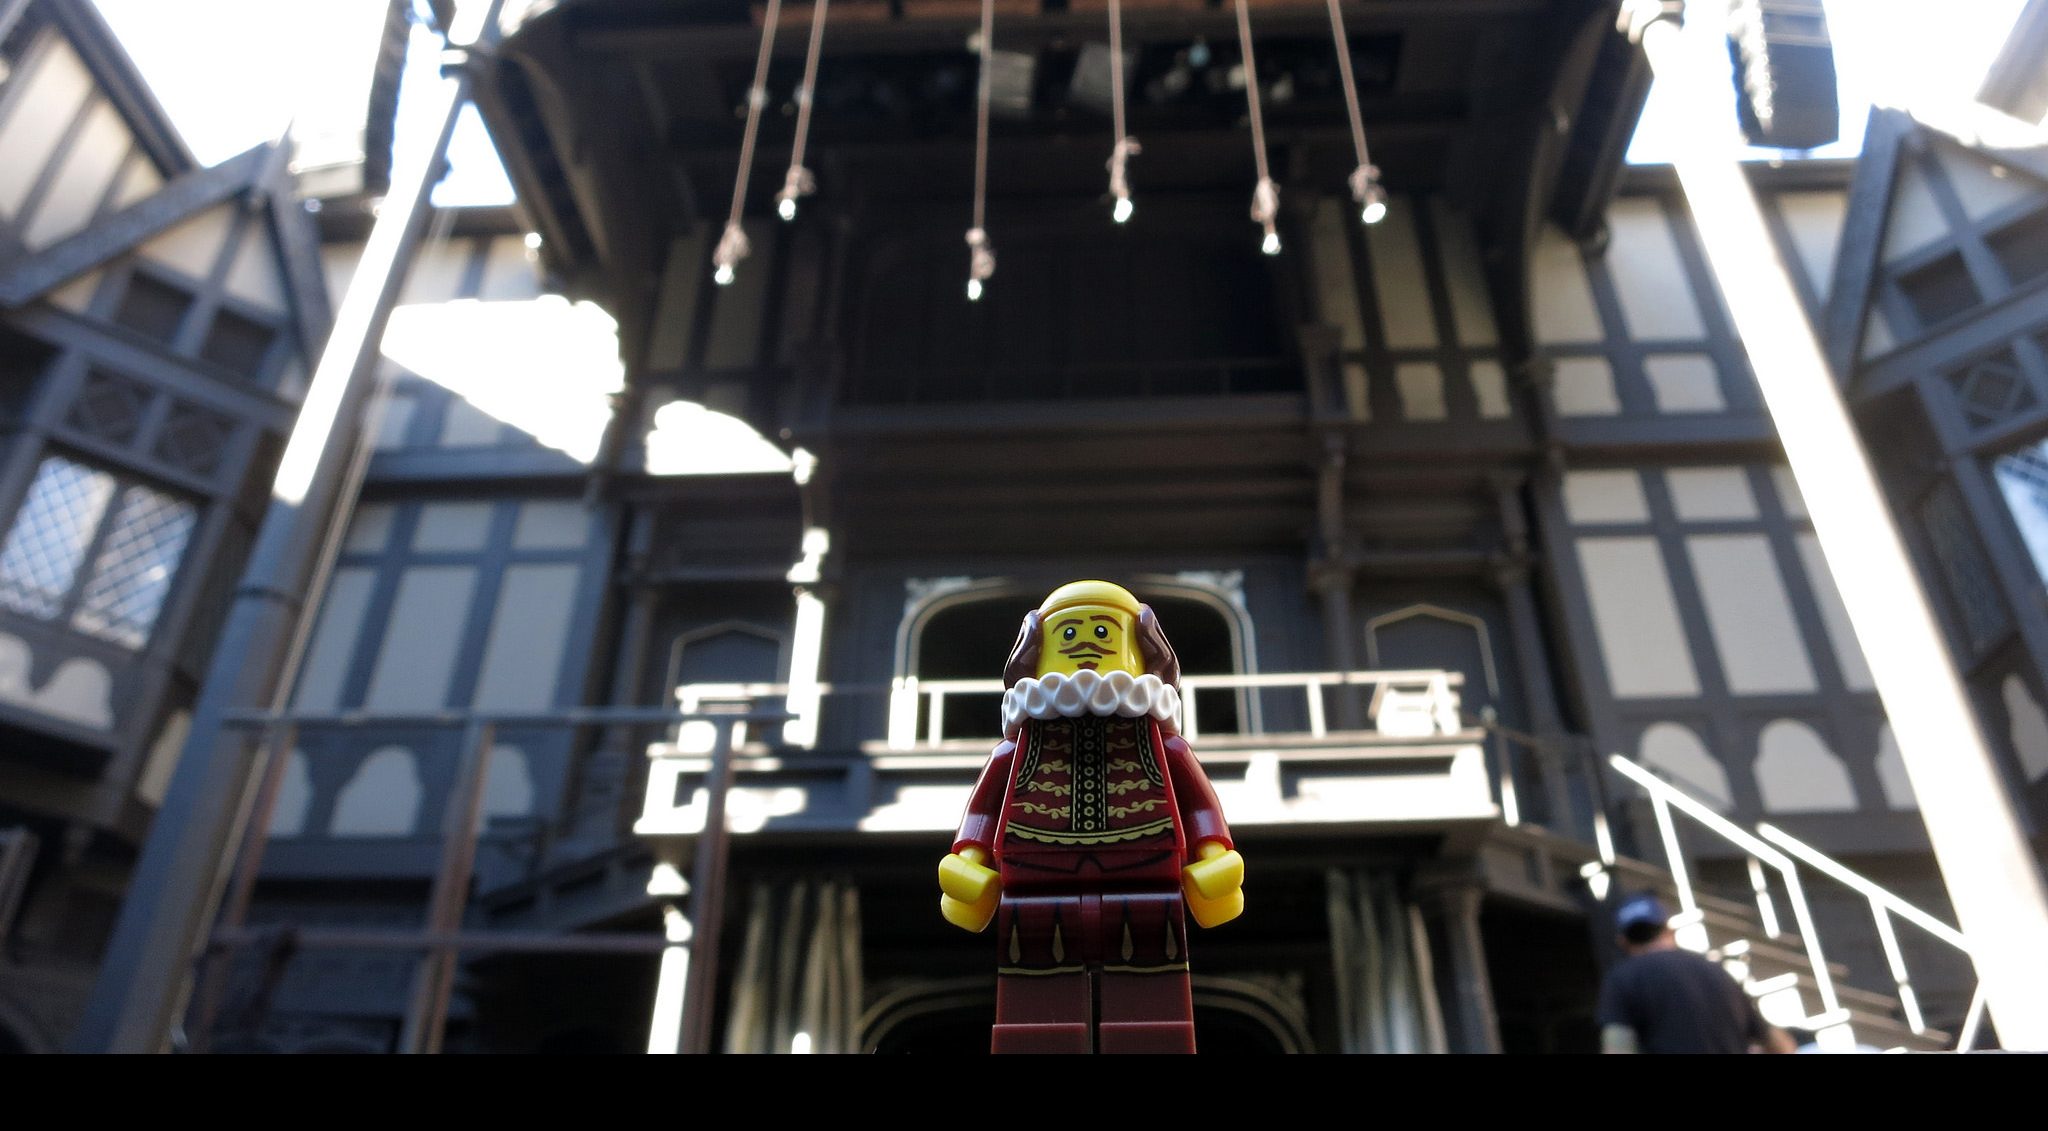 Lego Shakespeare standing in front of Lego Globe Theatre